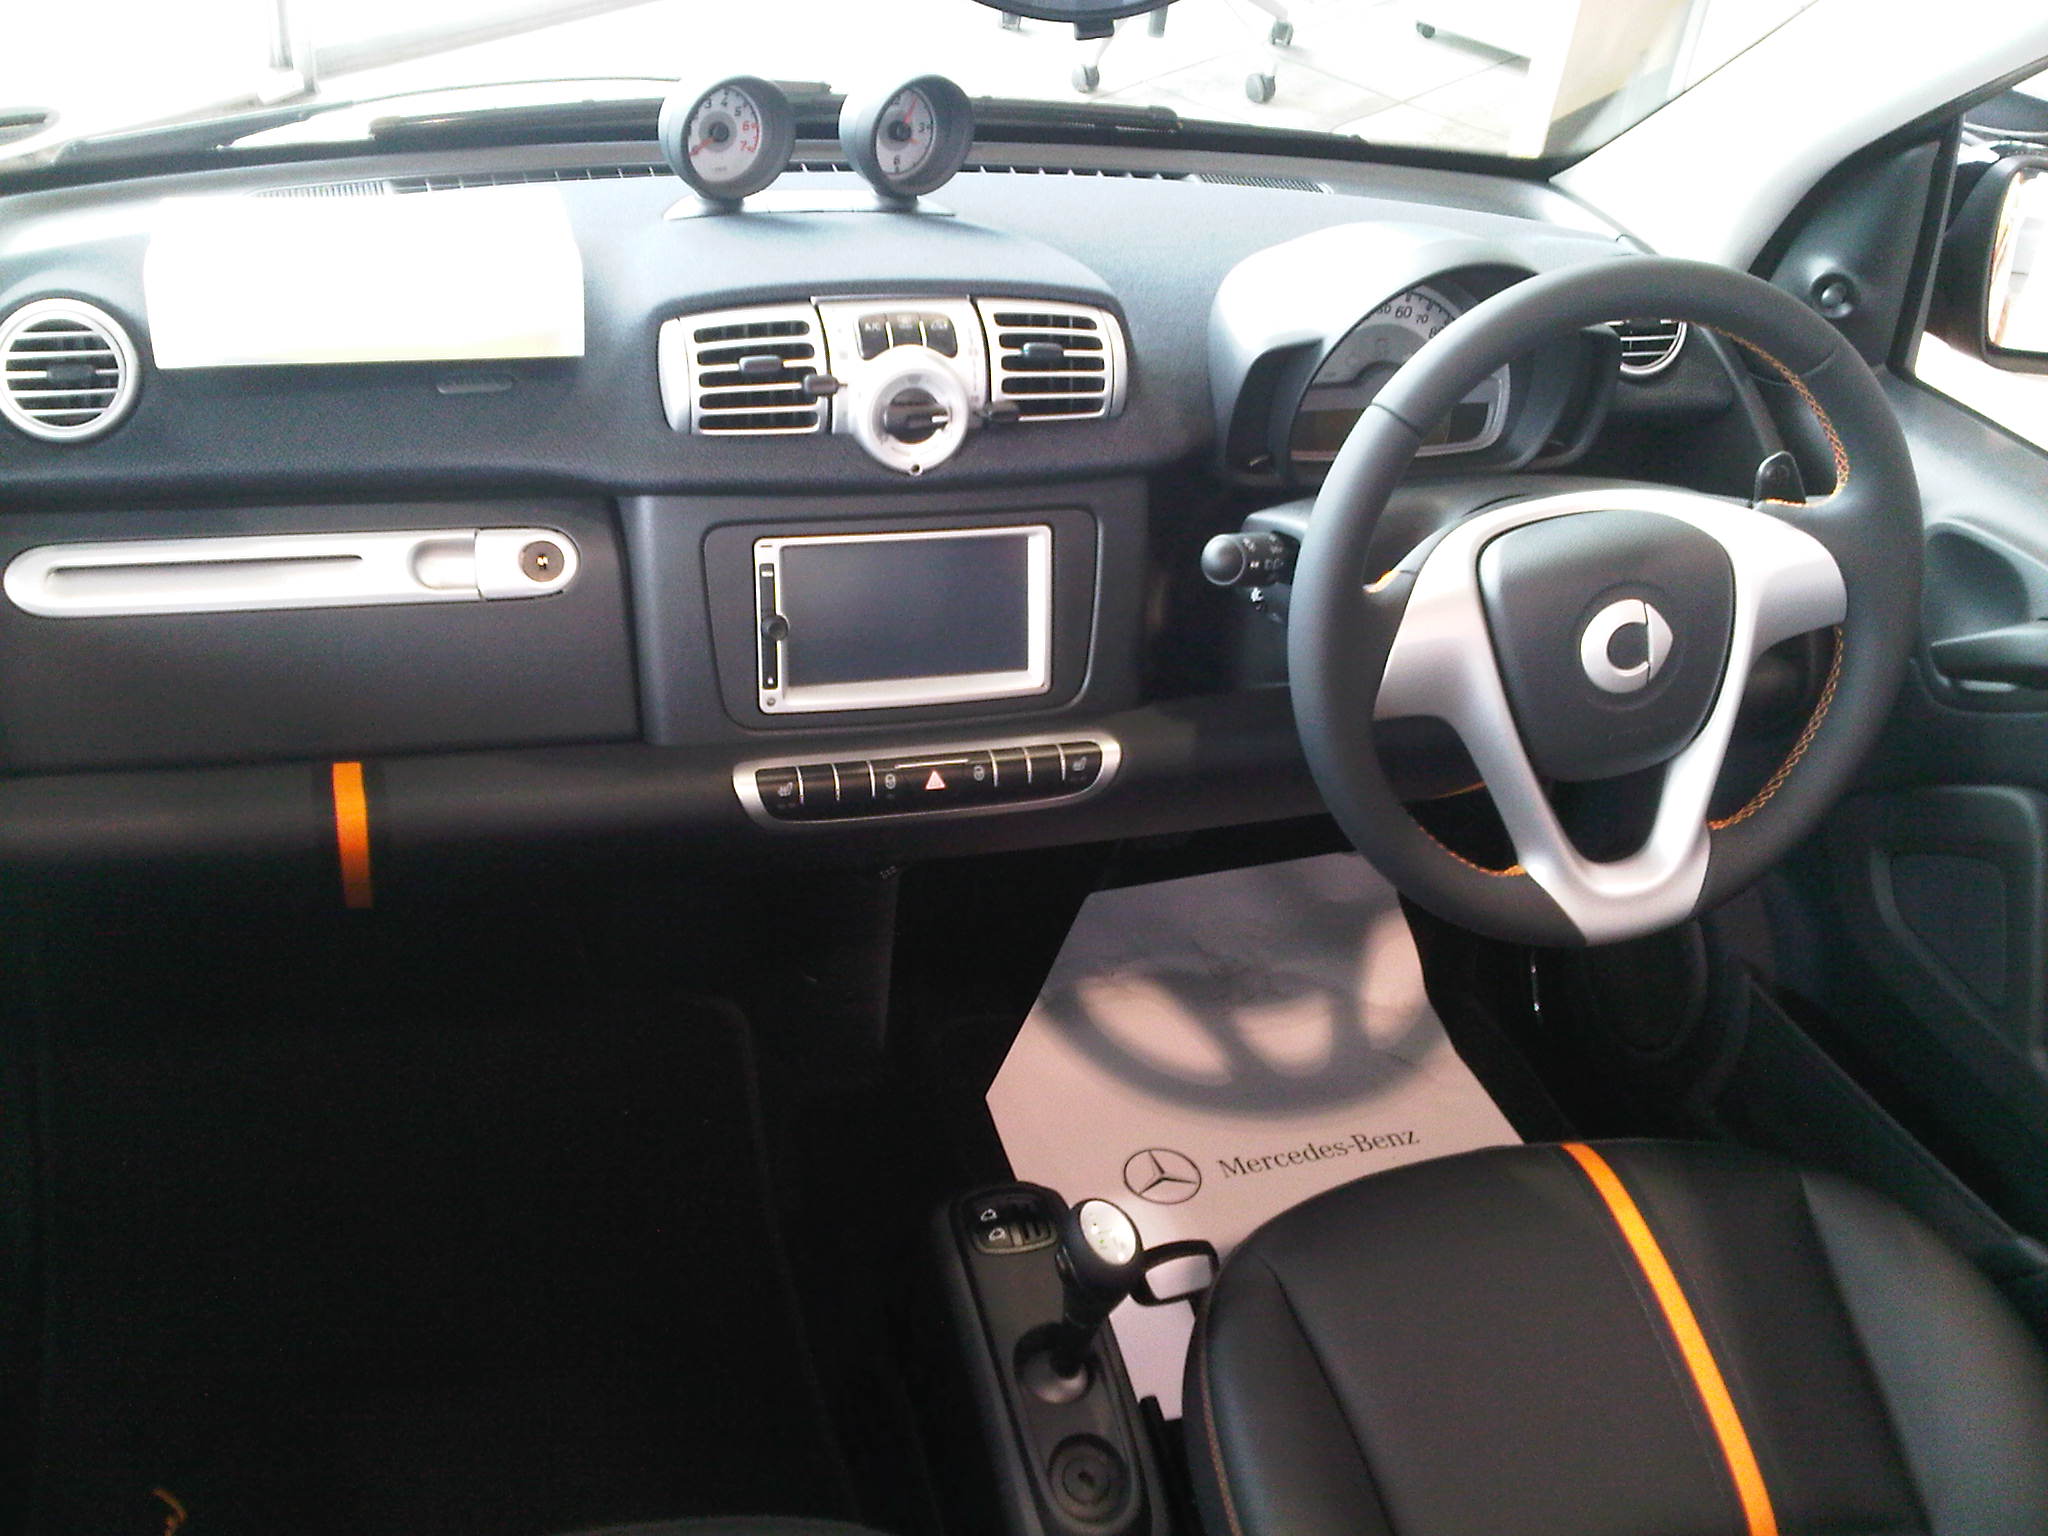 Smart Fortwo Special Edition